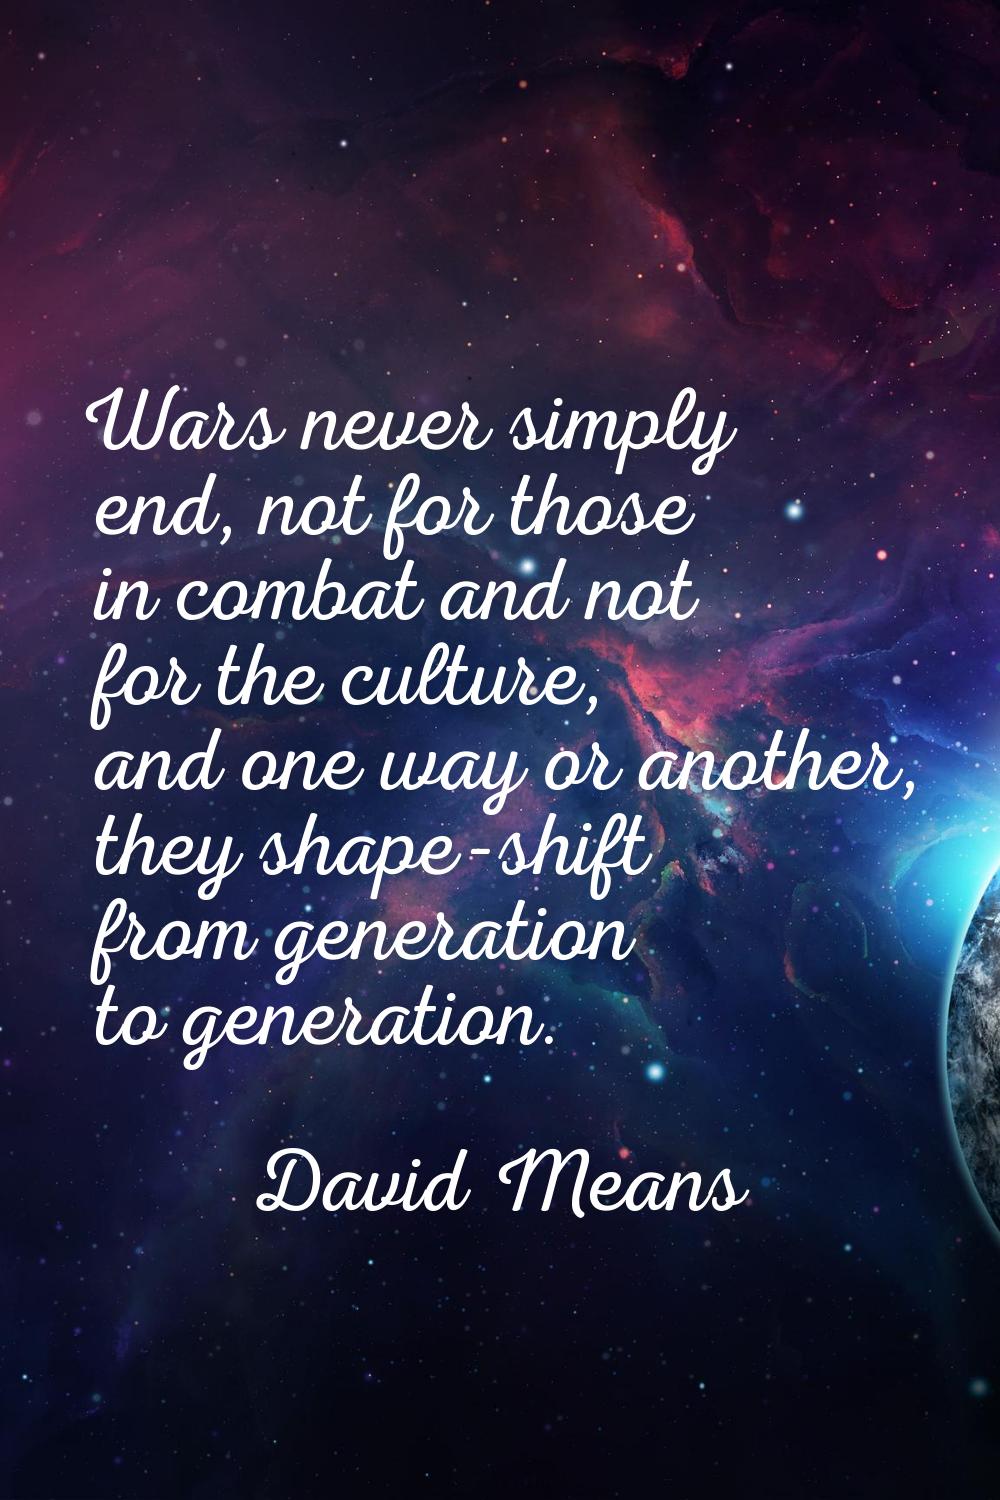 Wars never simply end, not for those in combat and not for the culture, and one way or another, the